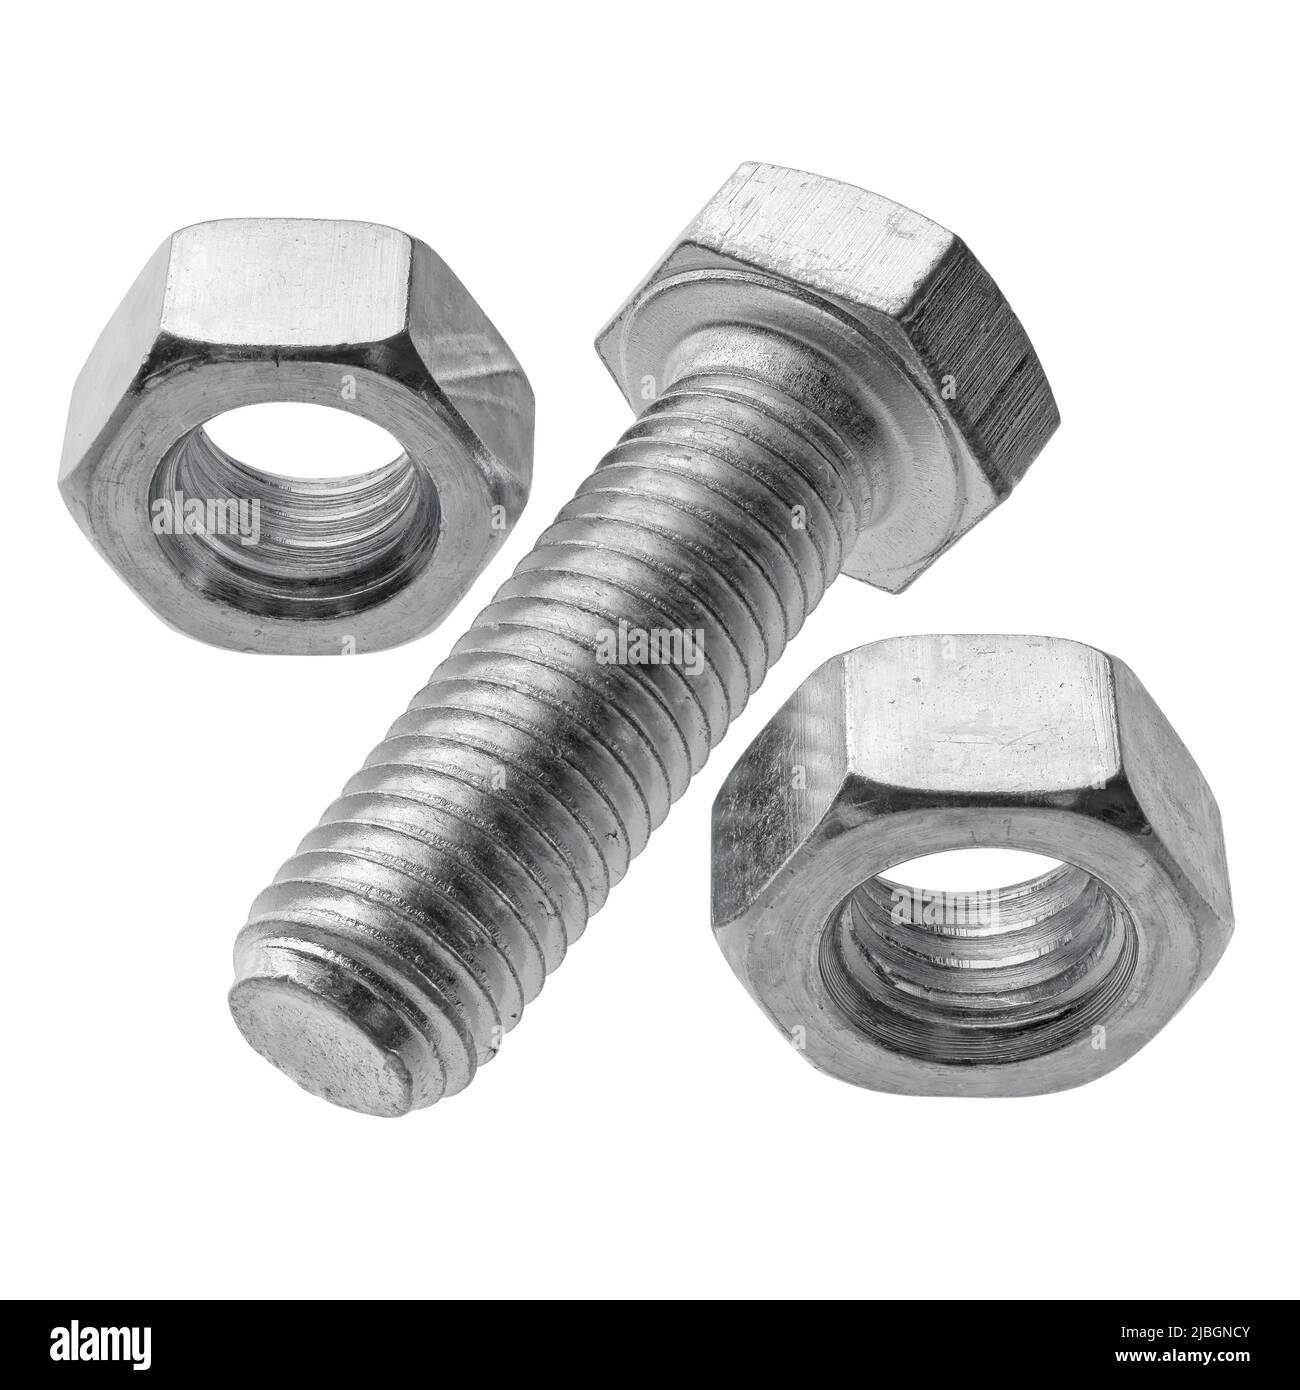 Group of two steel nuts and one bolt arranged as percent sign, isolated on white background Stock Photo